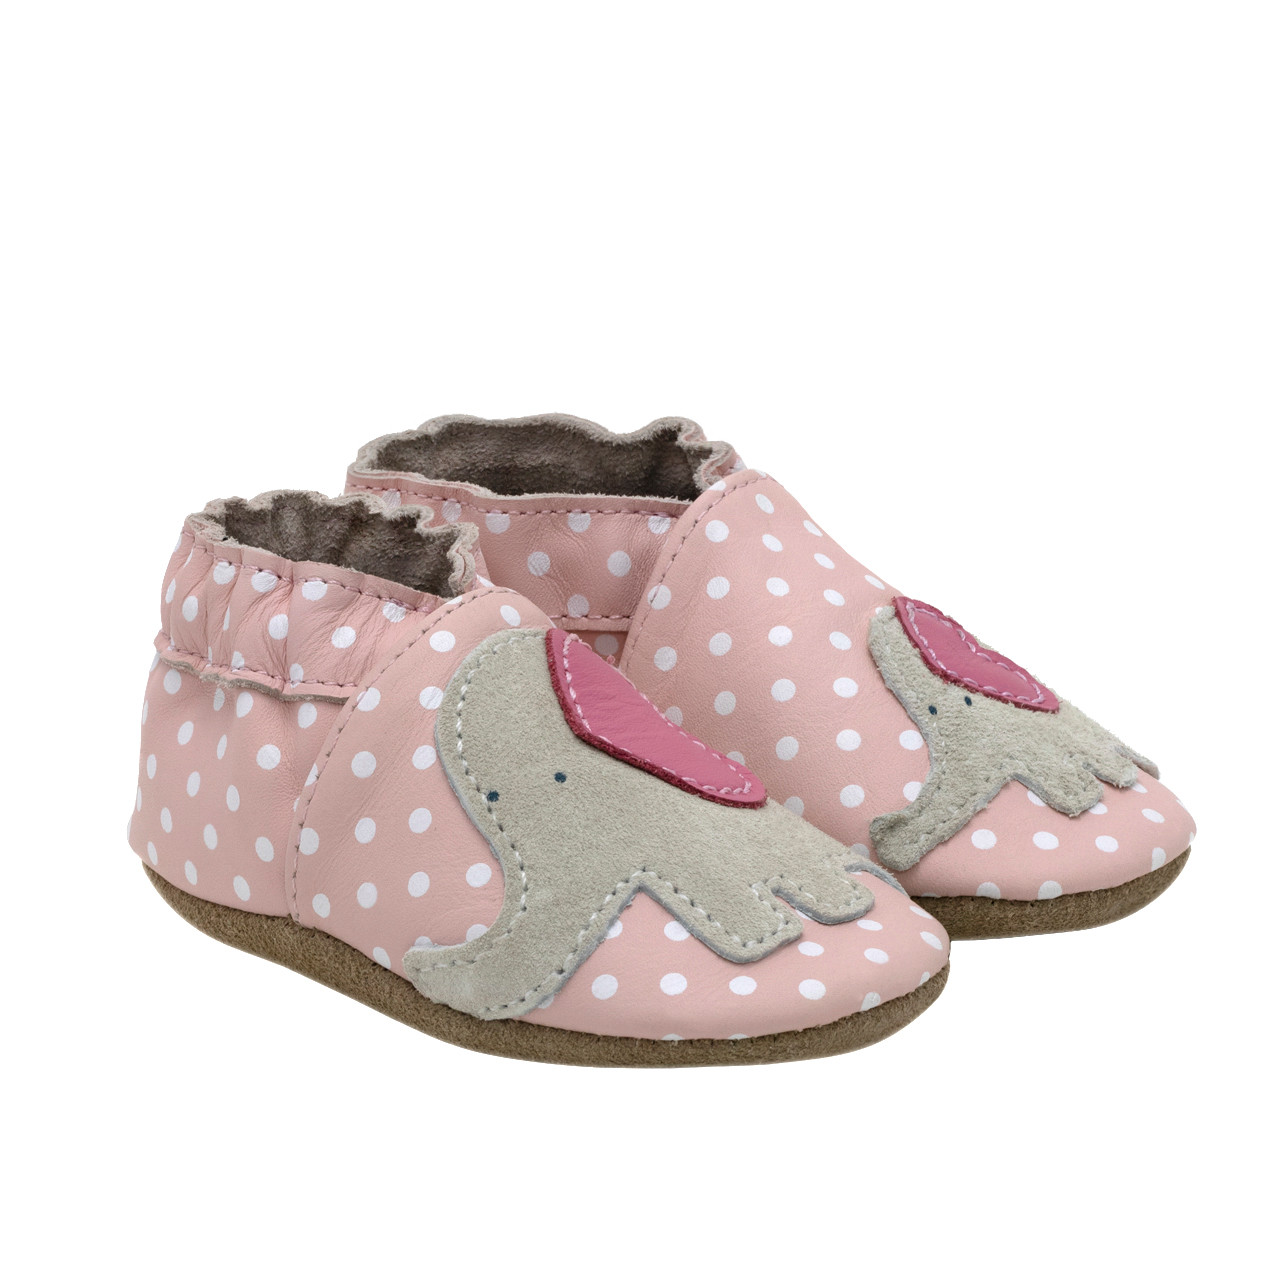 Pink Baby Shoes, High Quality